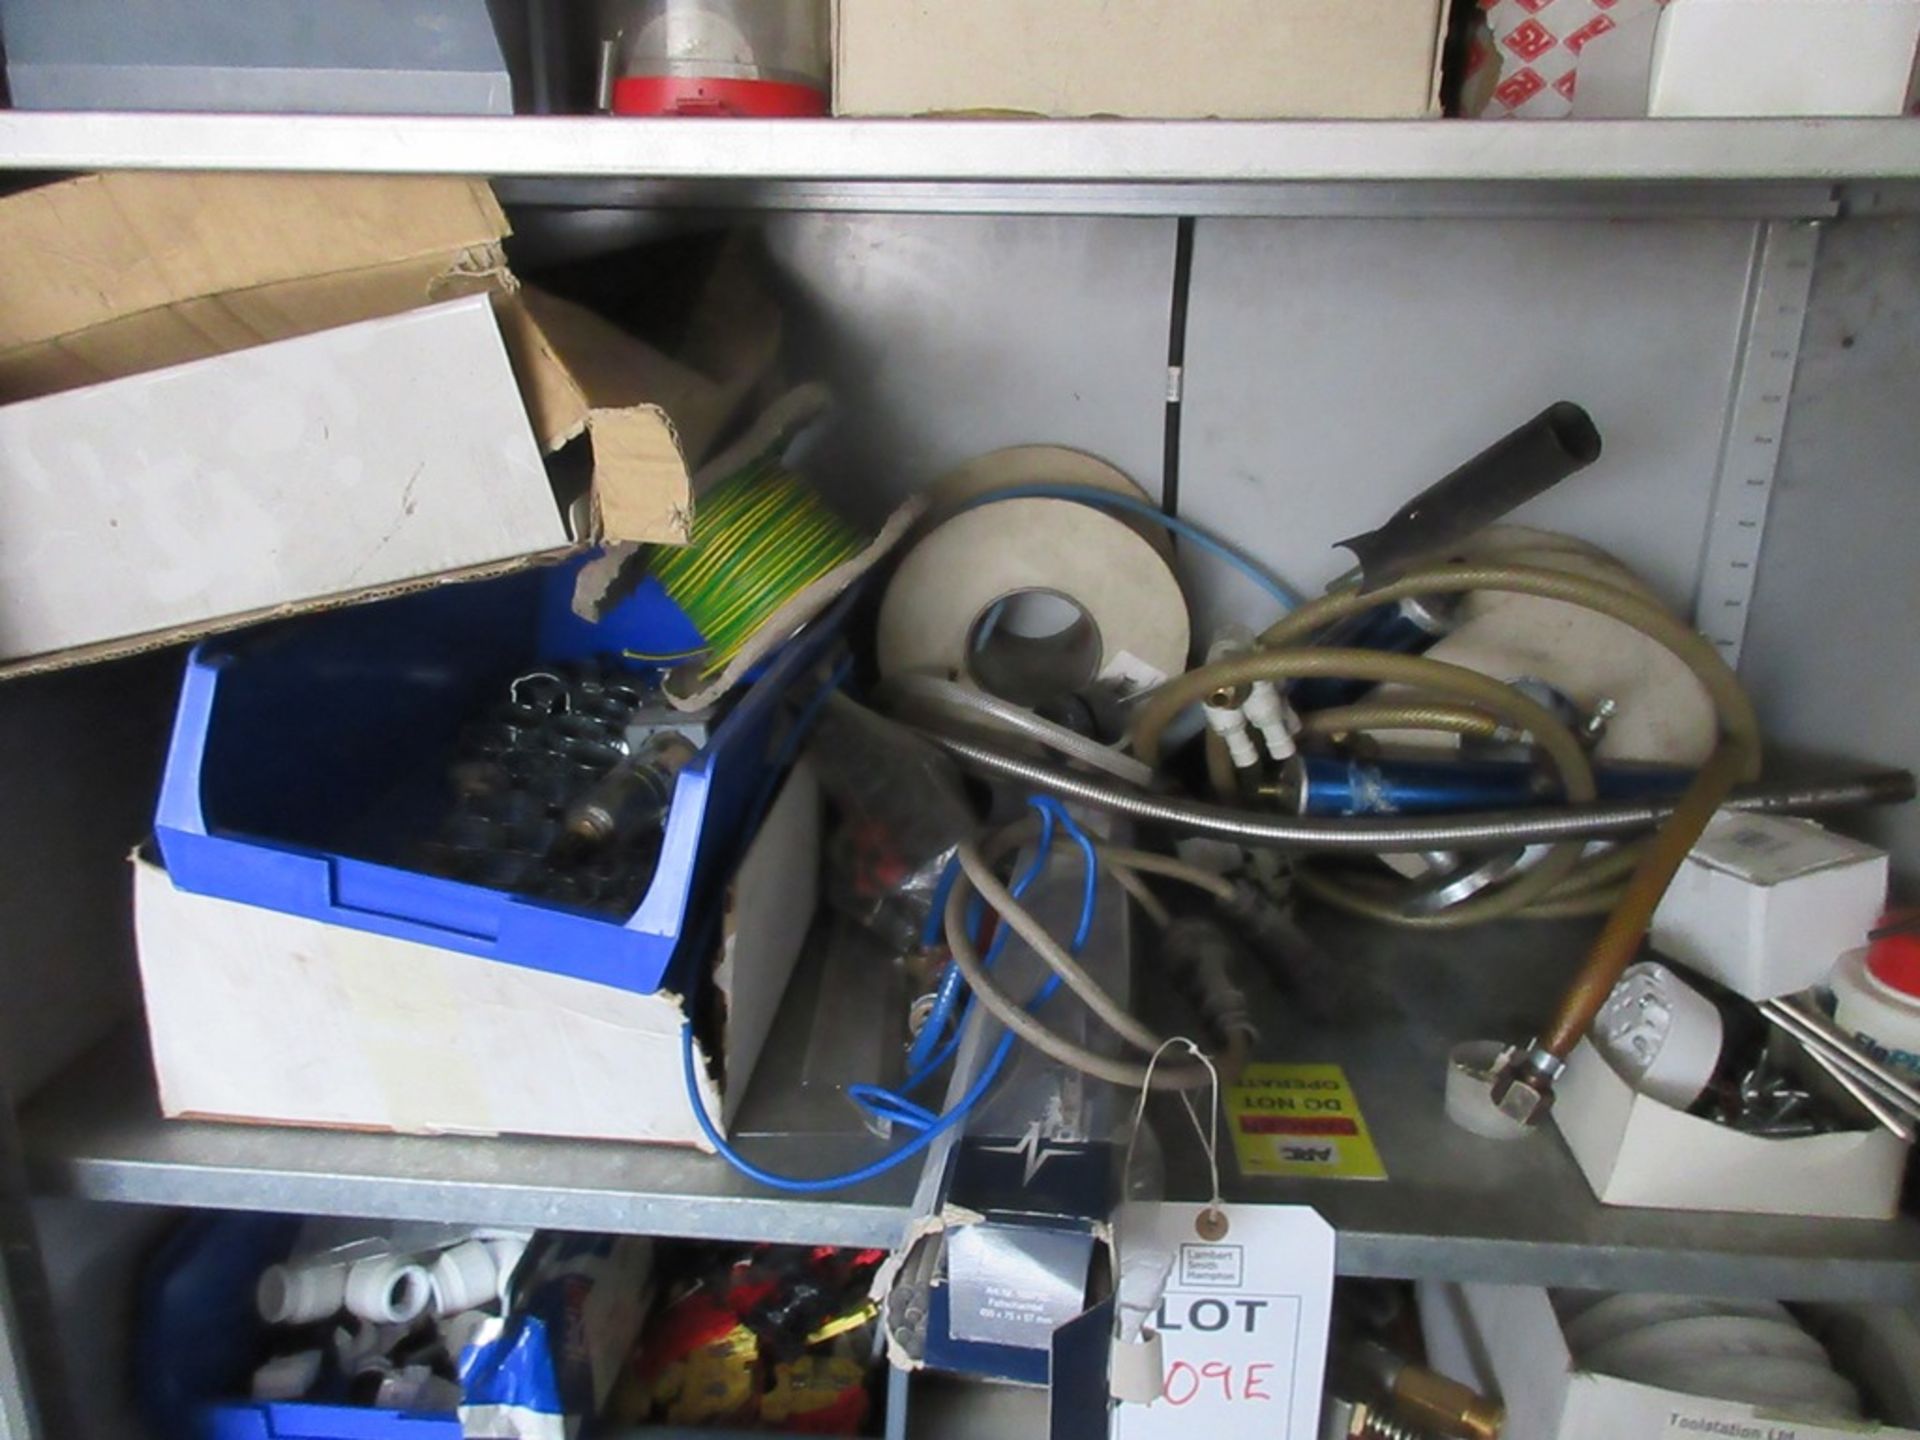 Cupboards and contents including various machine parts, pipe clips, push fit connectors, circlips, - Image 2 of 5